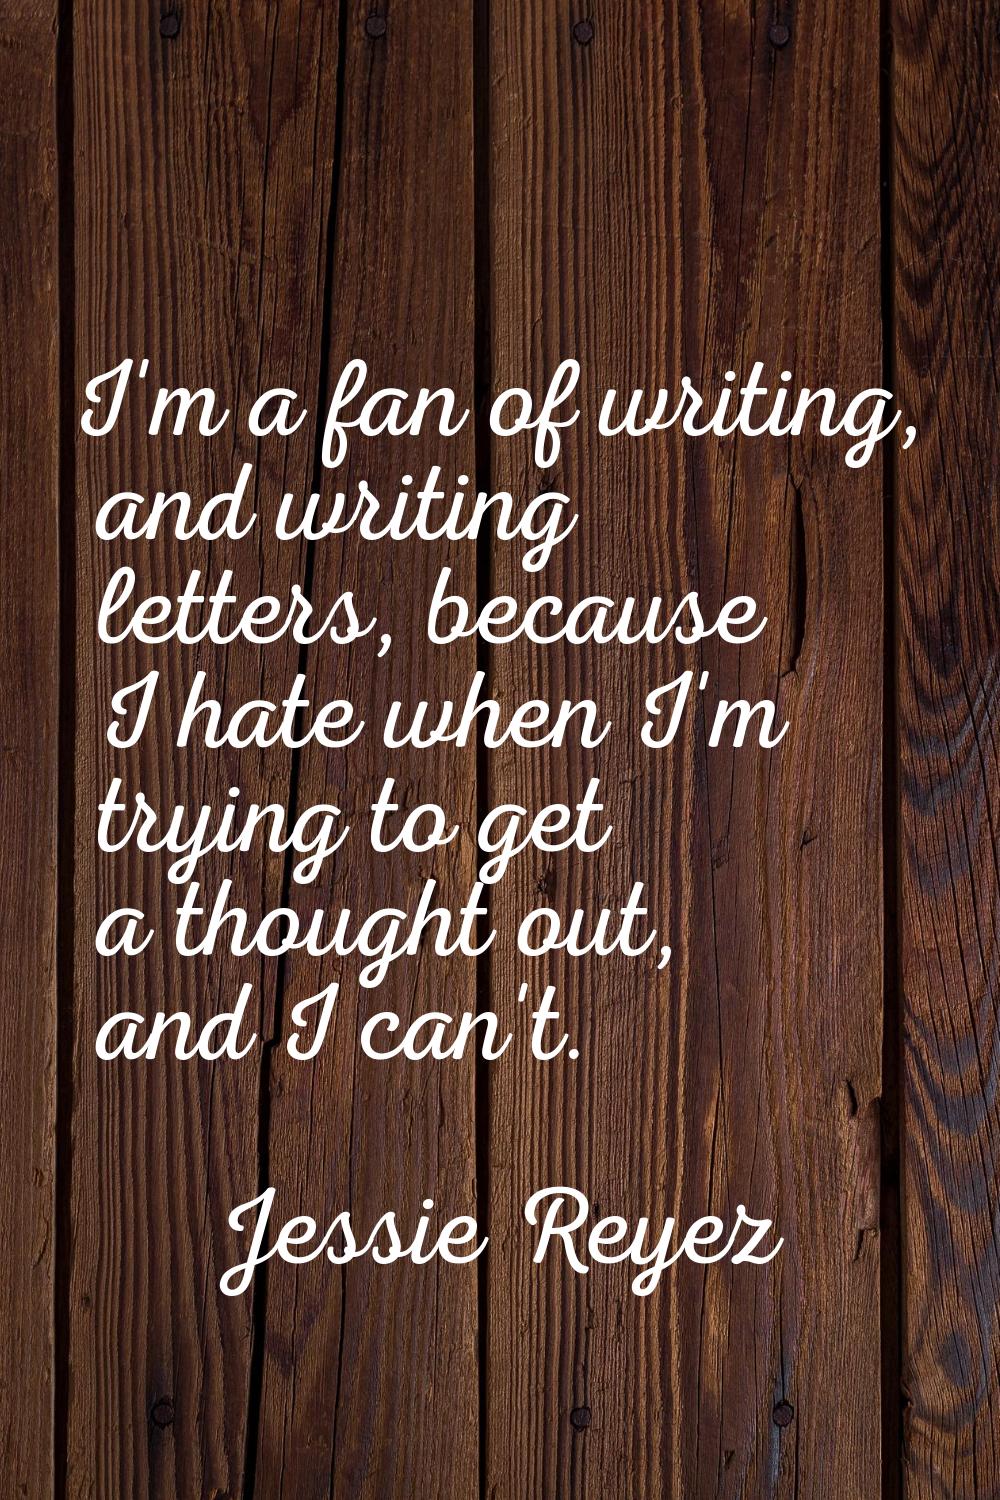 I'm a fan of writing, and writing letters, because I hate when I'm trying to get a thought out, and